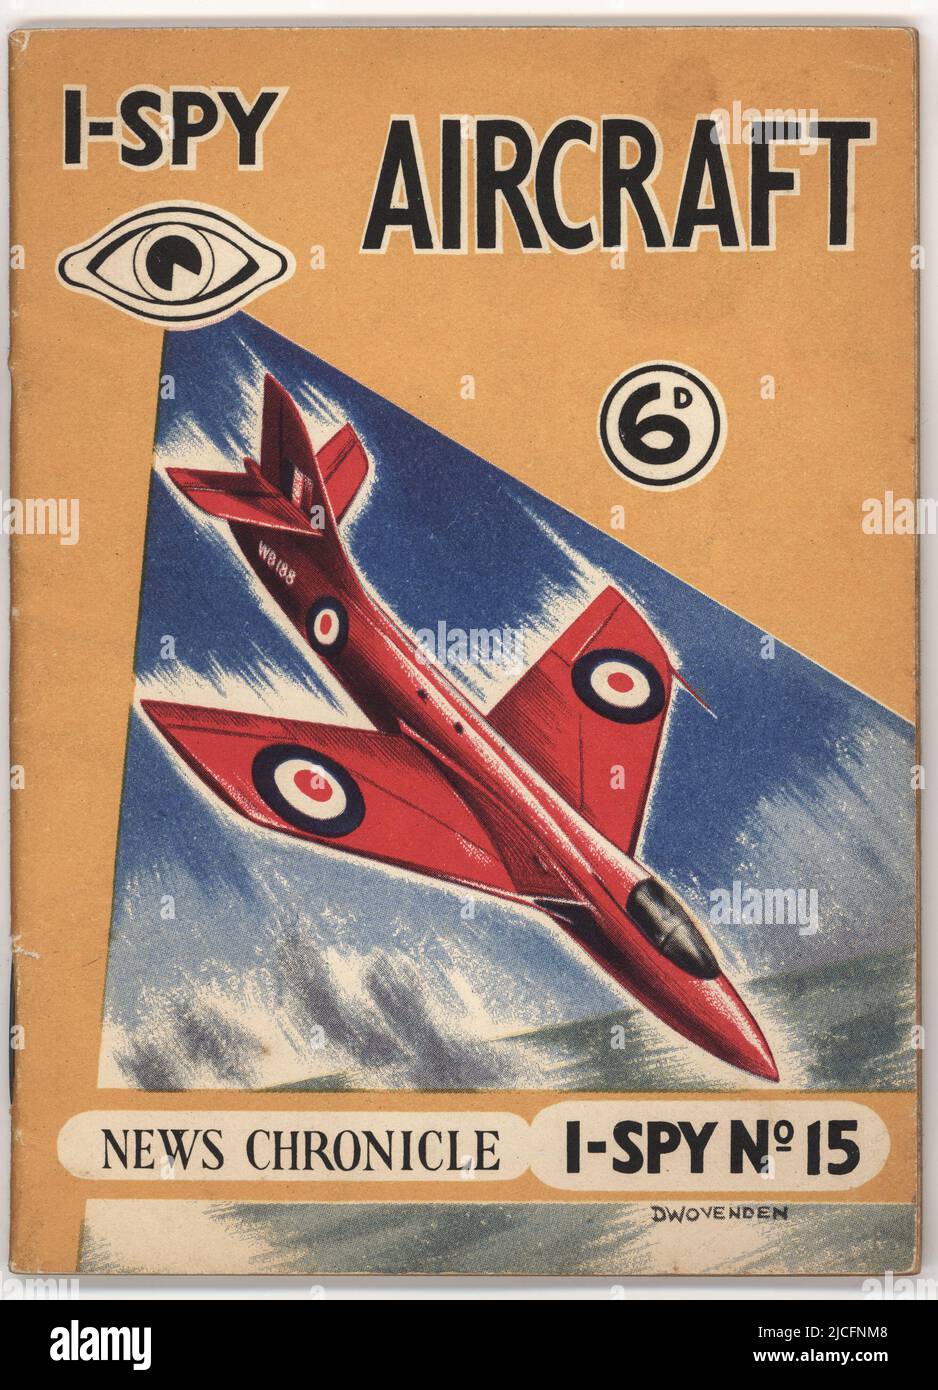 Colour cover of I-Spy Aircraft book (I-Spy No.15, 1960-61), published by News Chronicle, London, UK. Children's observation and recoding game. Stock Photo